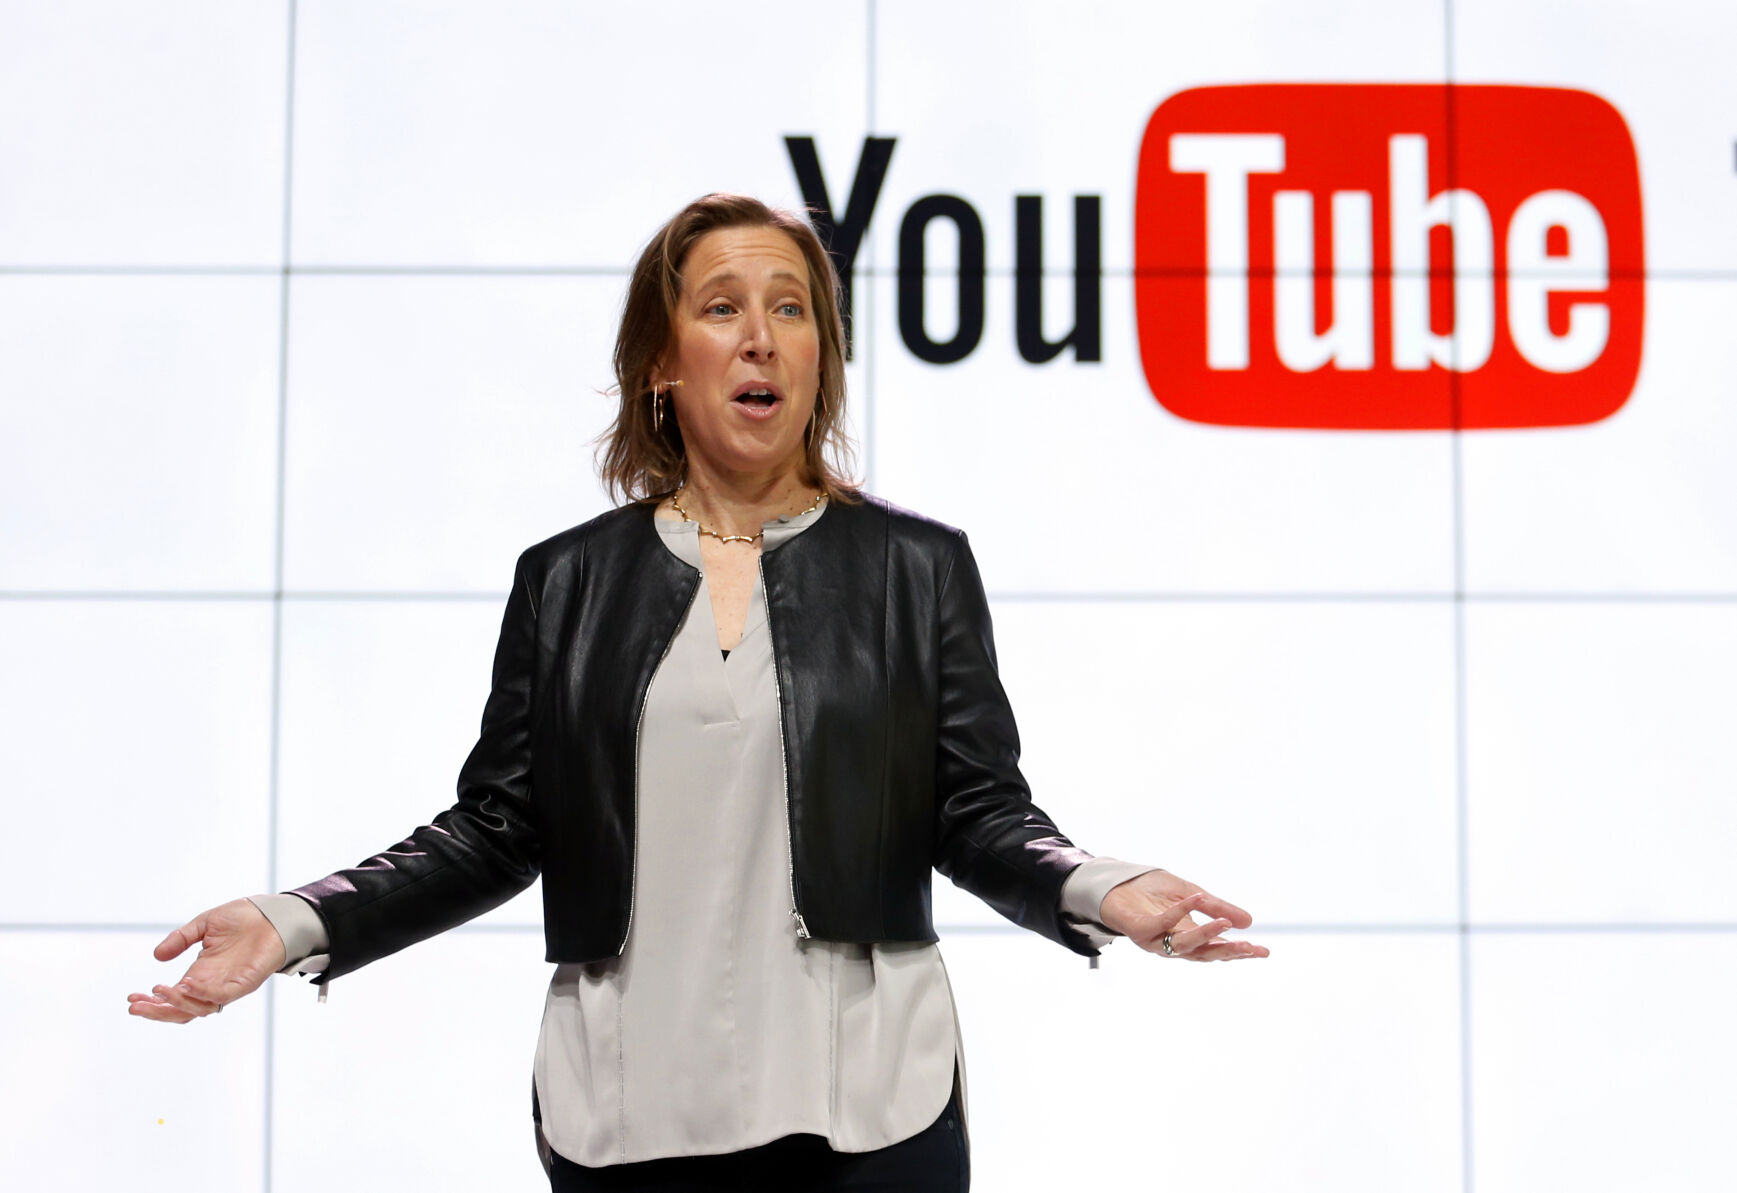 <p>FILE - YouTube CEO Susan Wojcicki speaks during the introduction of YouTube TV at YouTube Space LA on Feb. 28, 2017, in Los Angeles. Wojcicki announced Thursday, Feb. 16, 2023, that she is stepping down as CEO at YouTube after spending nine years as the head of the social media platform. (AP Photo/Reed Saxon, File)</p>   PHOTO CREDIT: Reed Saxon 